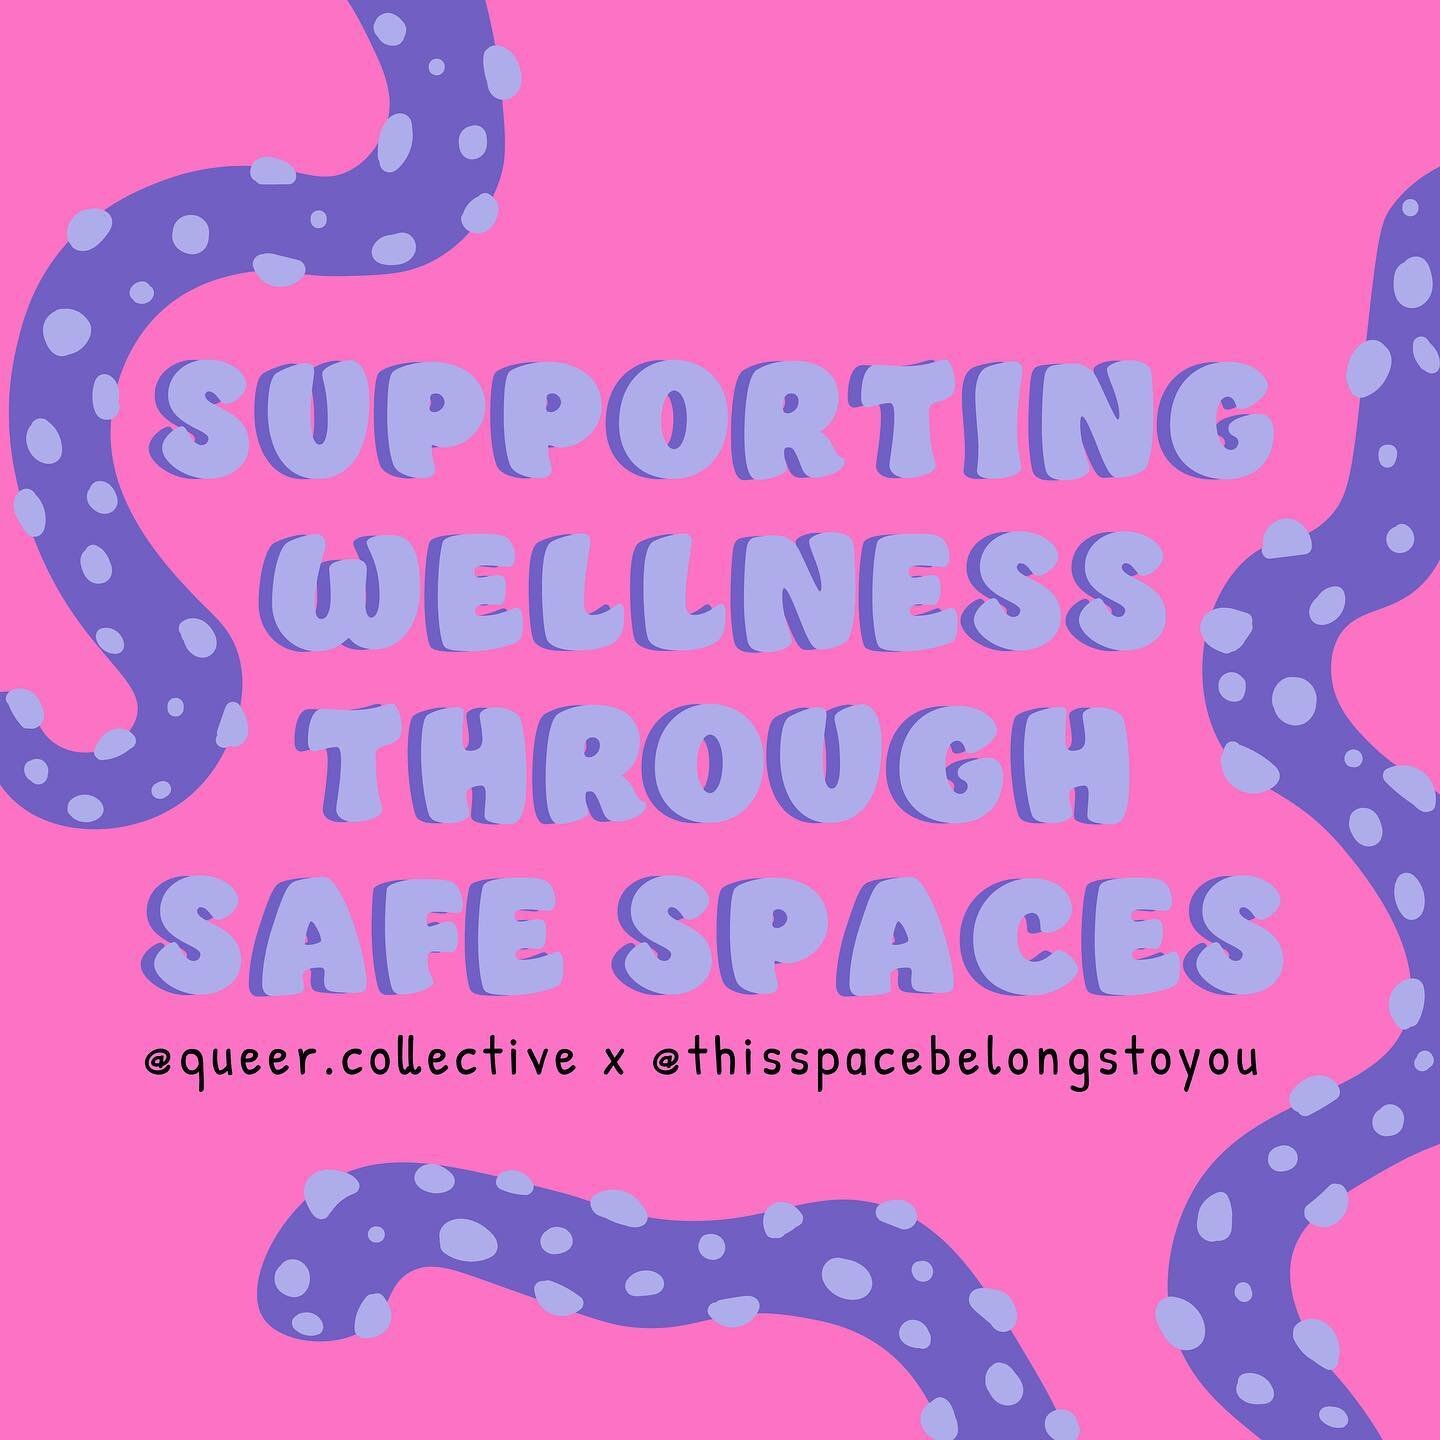 How have safe spaces played a role in your life? 💭
.
Written by: @thisspacebelongstoyou 
Graphics by: @emgiosk